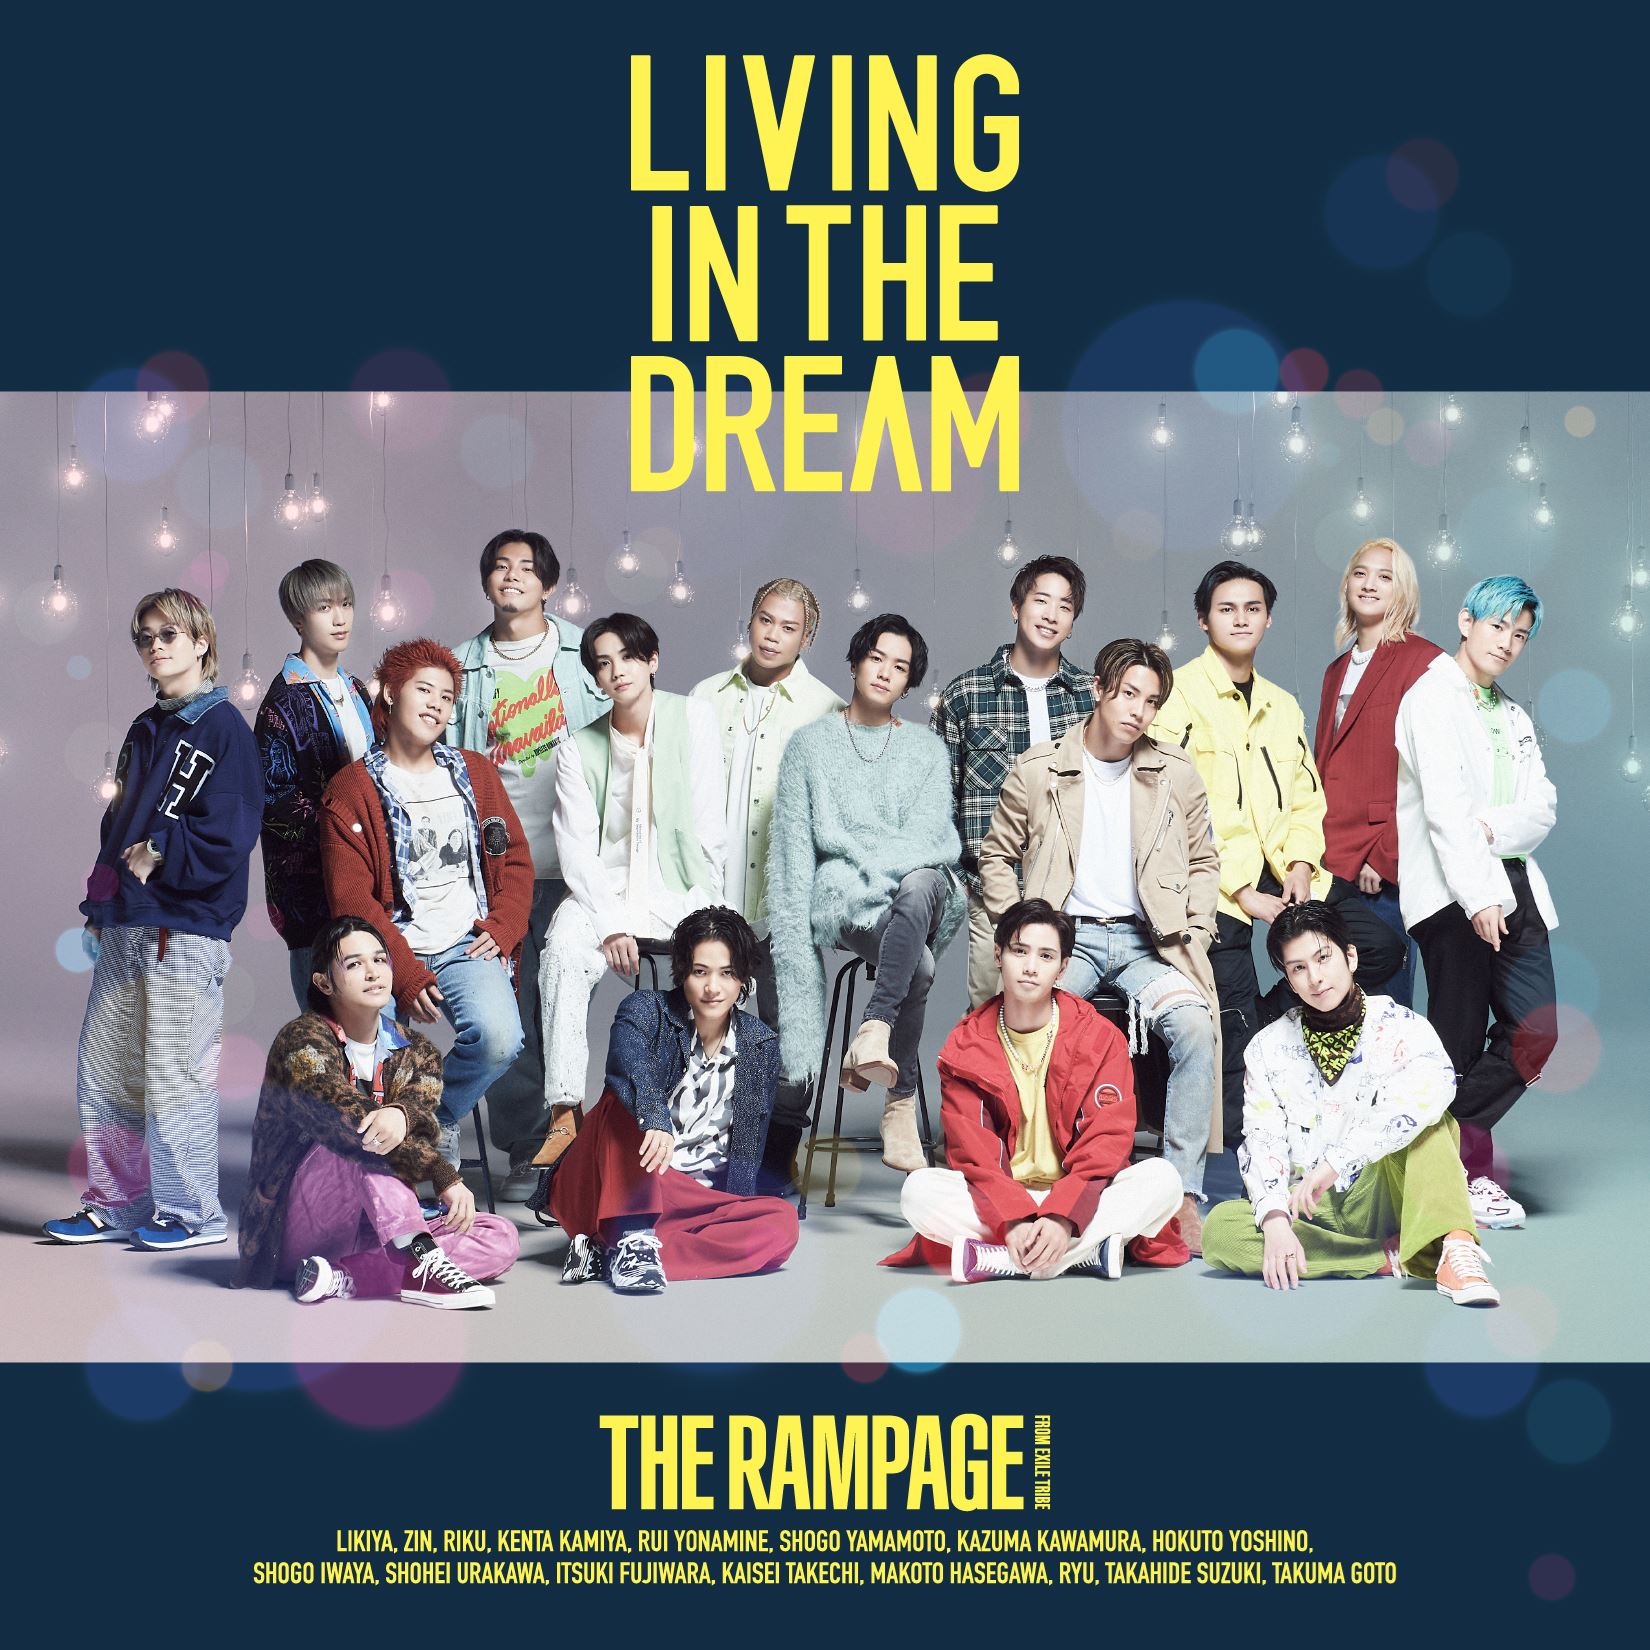 『LIVING IN THE DREAM』FIGHT & LIVE盤 ジャケット